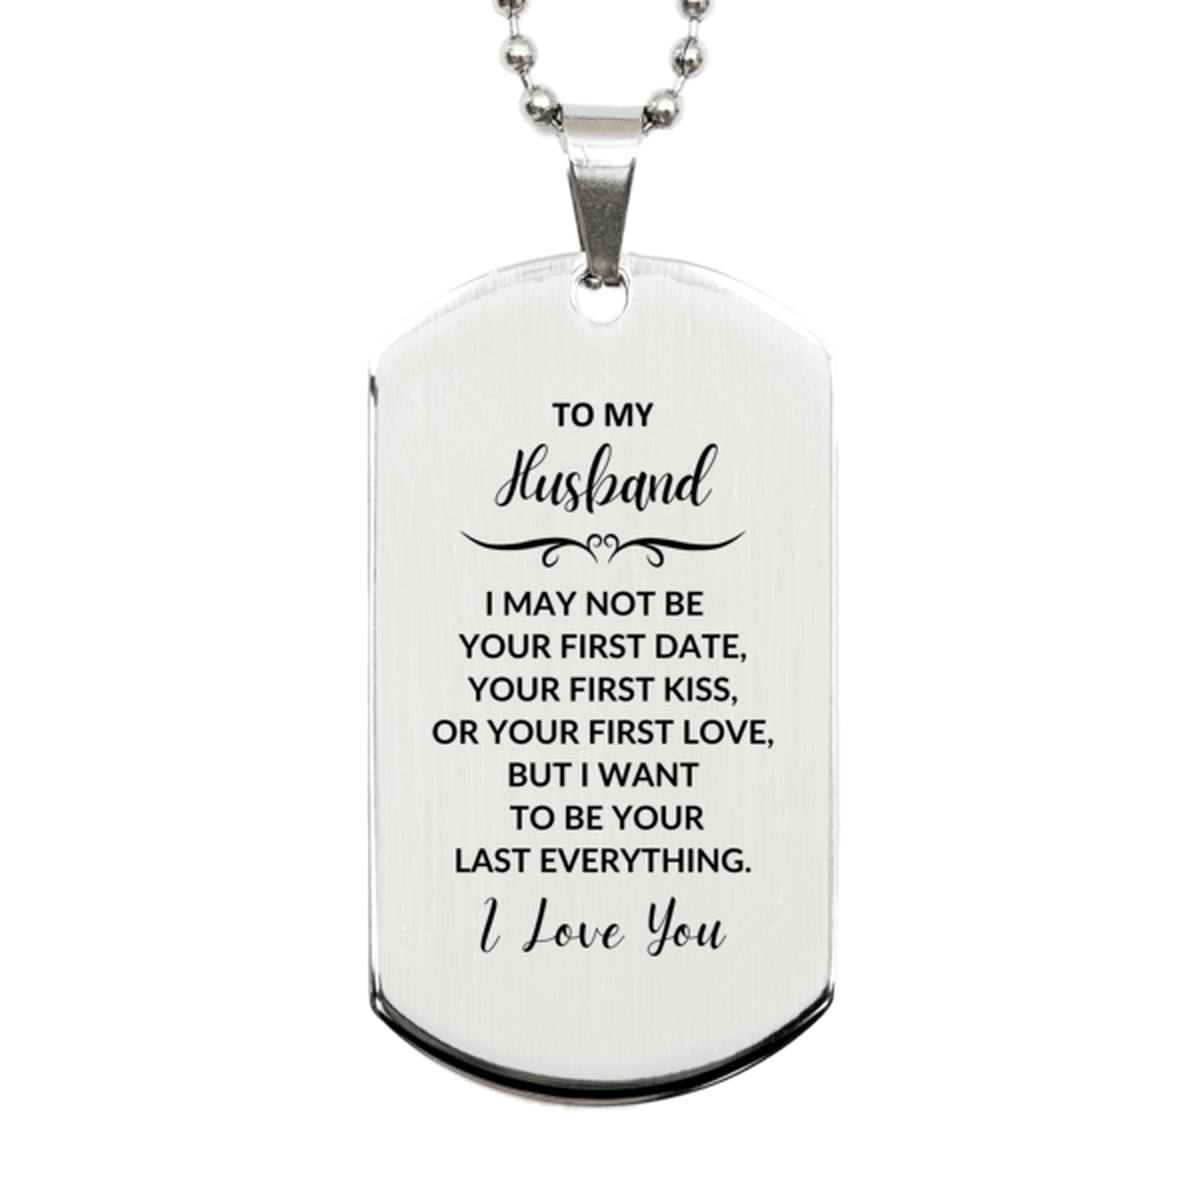 To My Husband I Want to Be Your Last Everything Engraved Silver Dog Tag Necklace Romantic Valentine Gift - Mallard Moon Gift Shop